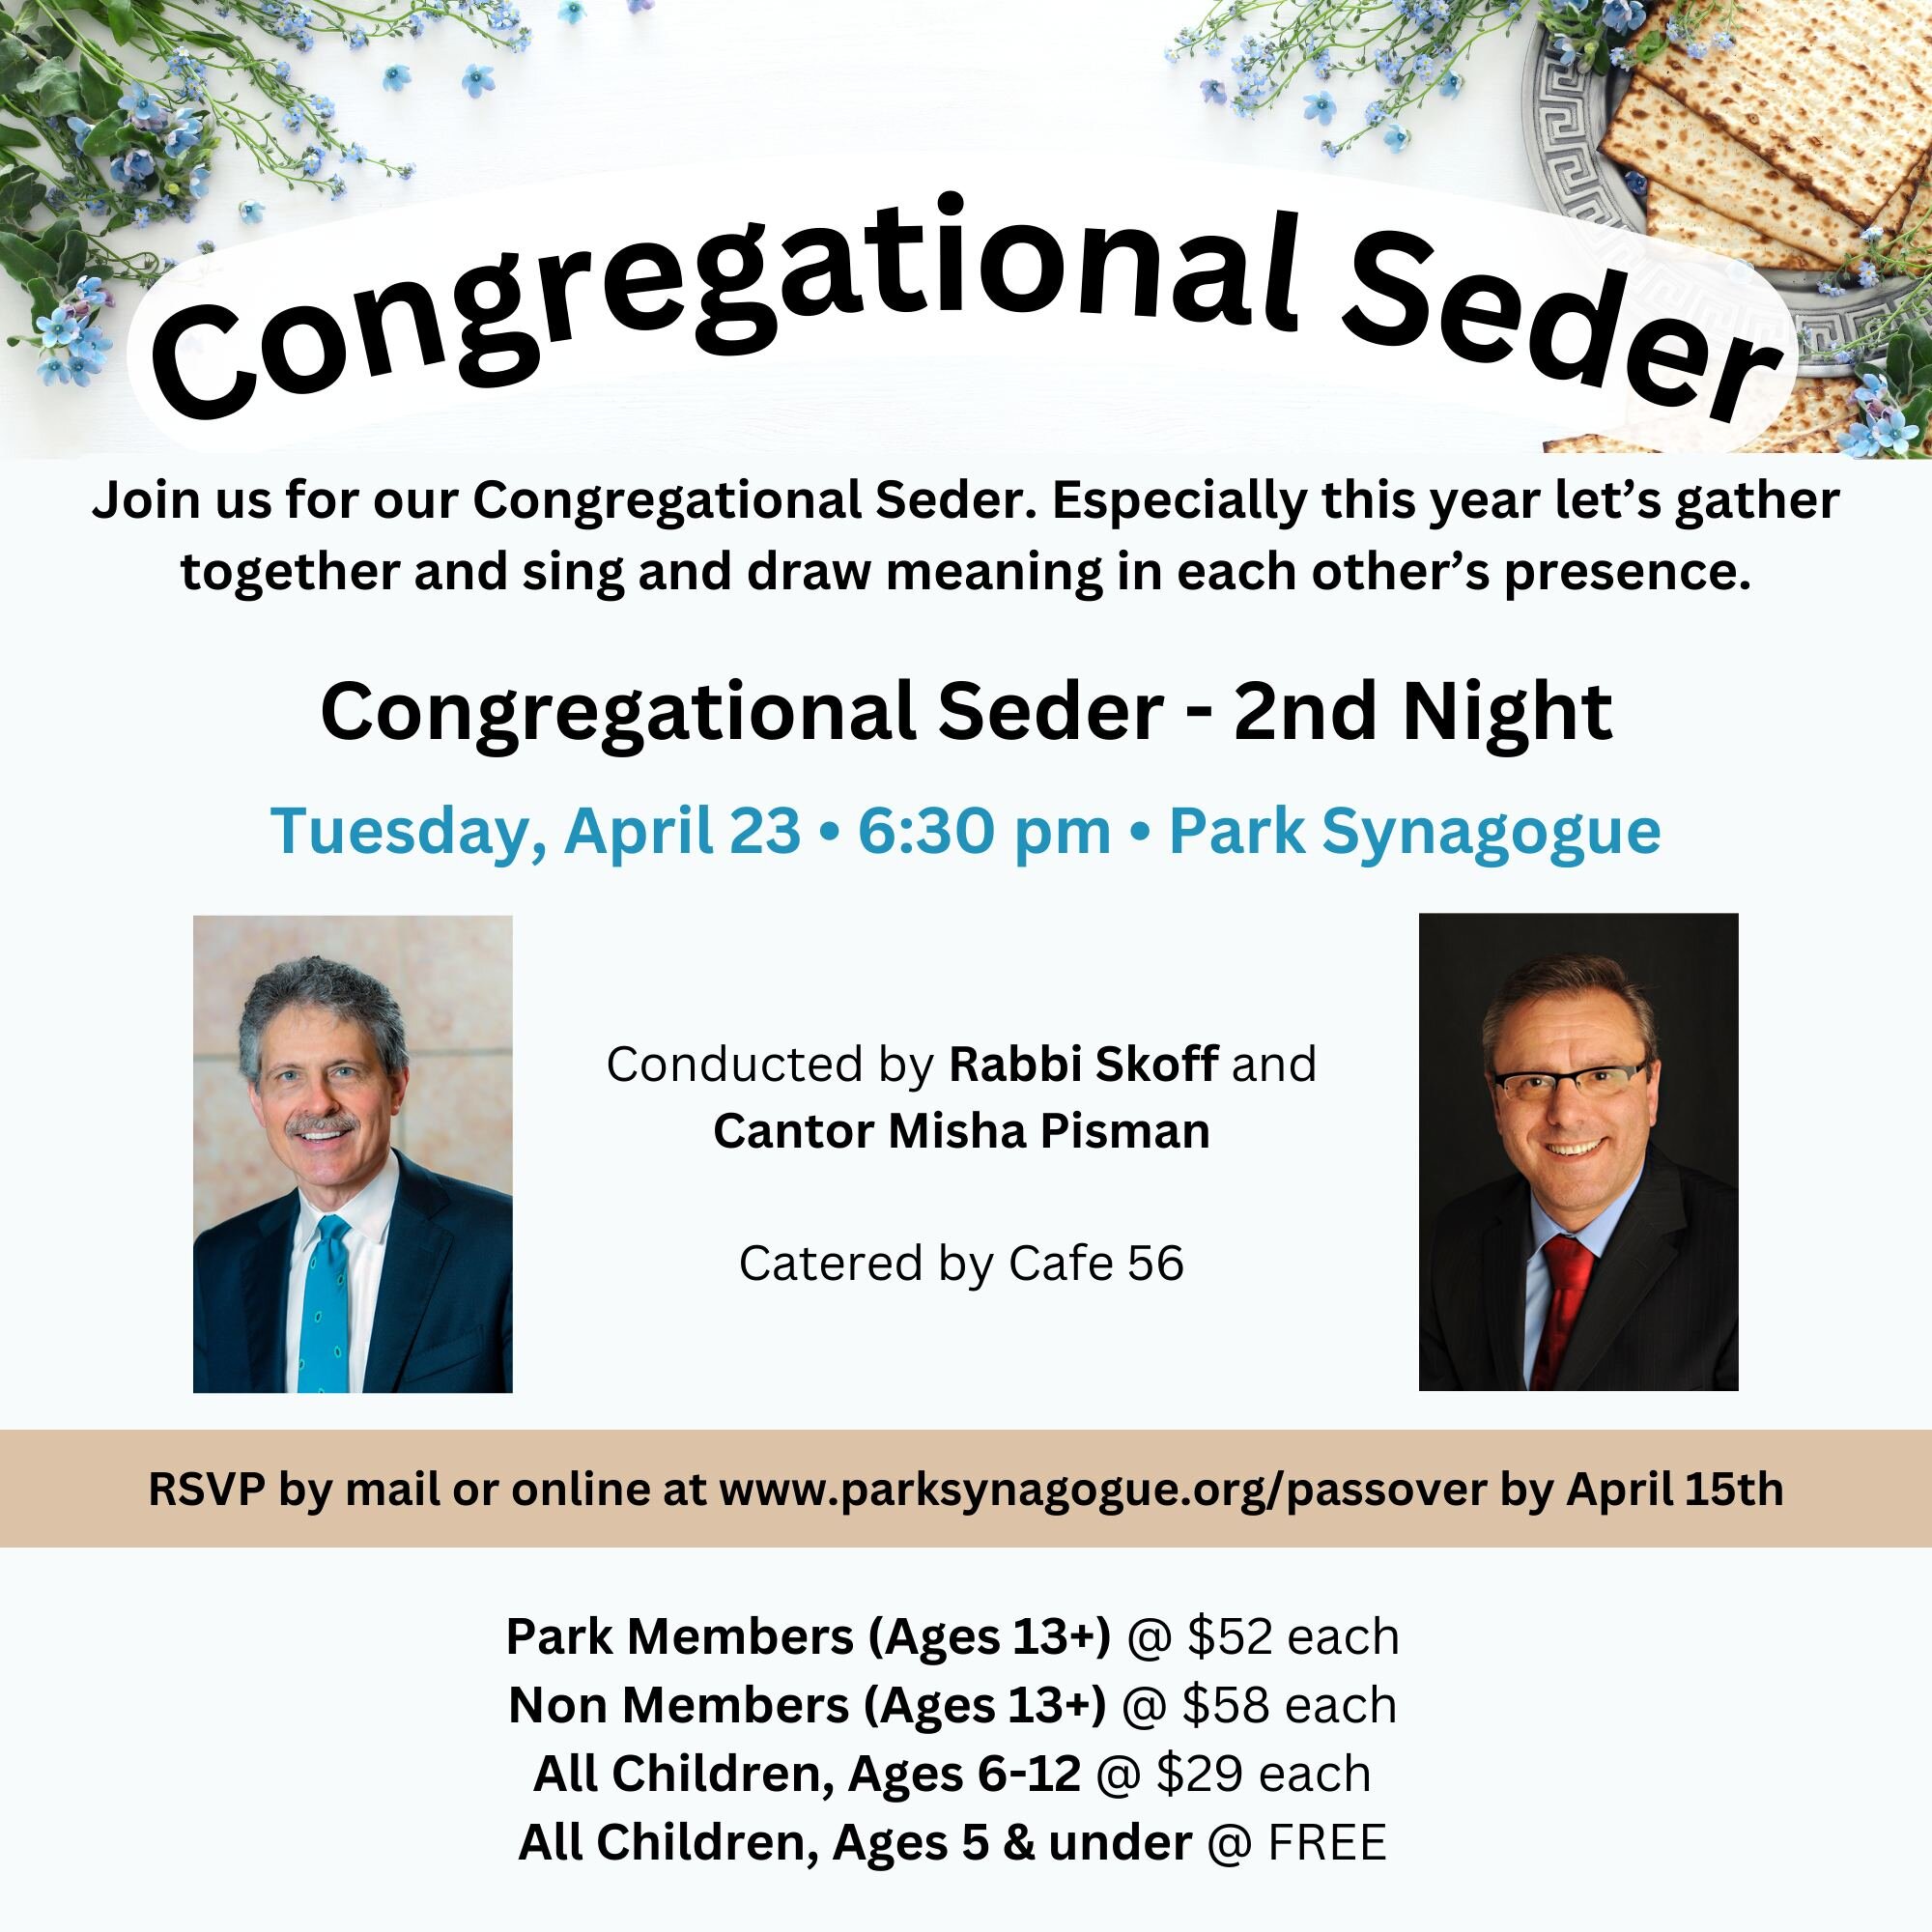 Passover is coming and we want to help you prepare. Visit our website for our Passover guide and upcoming programs to help you prepare! Sign up for our Congregational Seder on the 2nd Night of Passover too. https://www.parksynagogue.org/passover #Pas